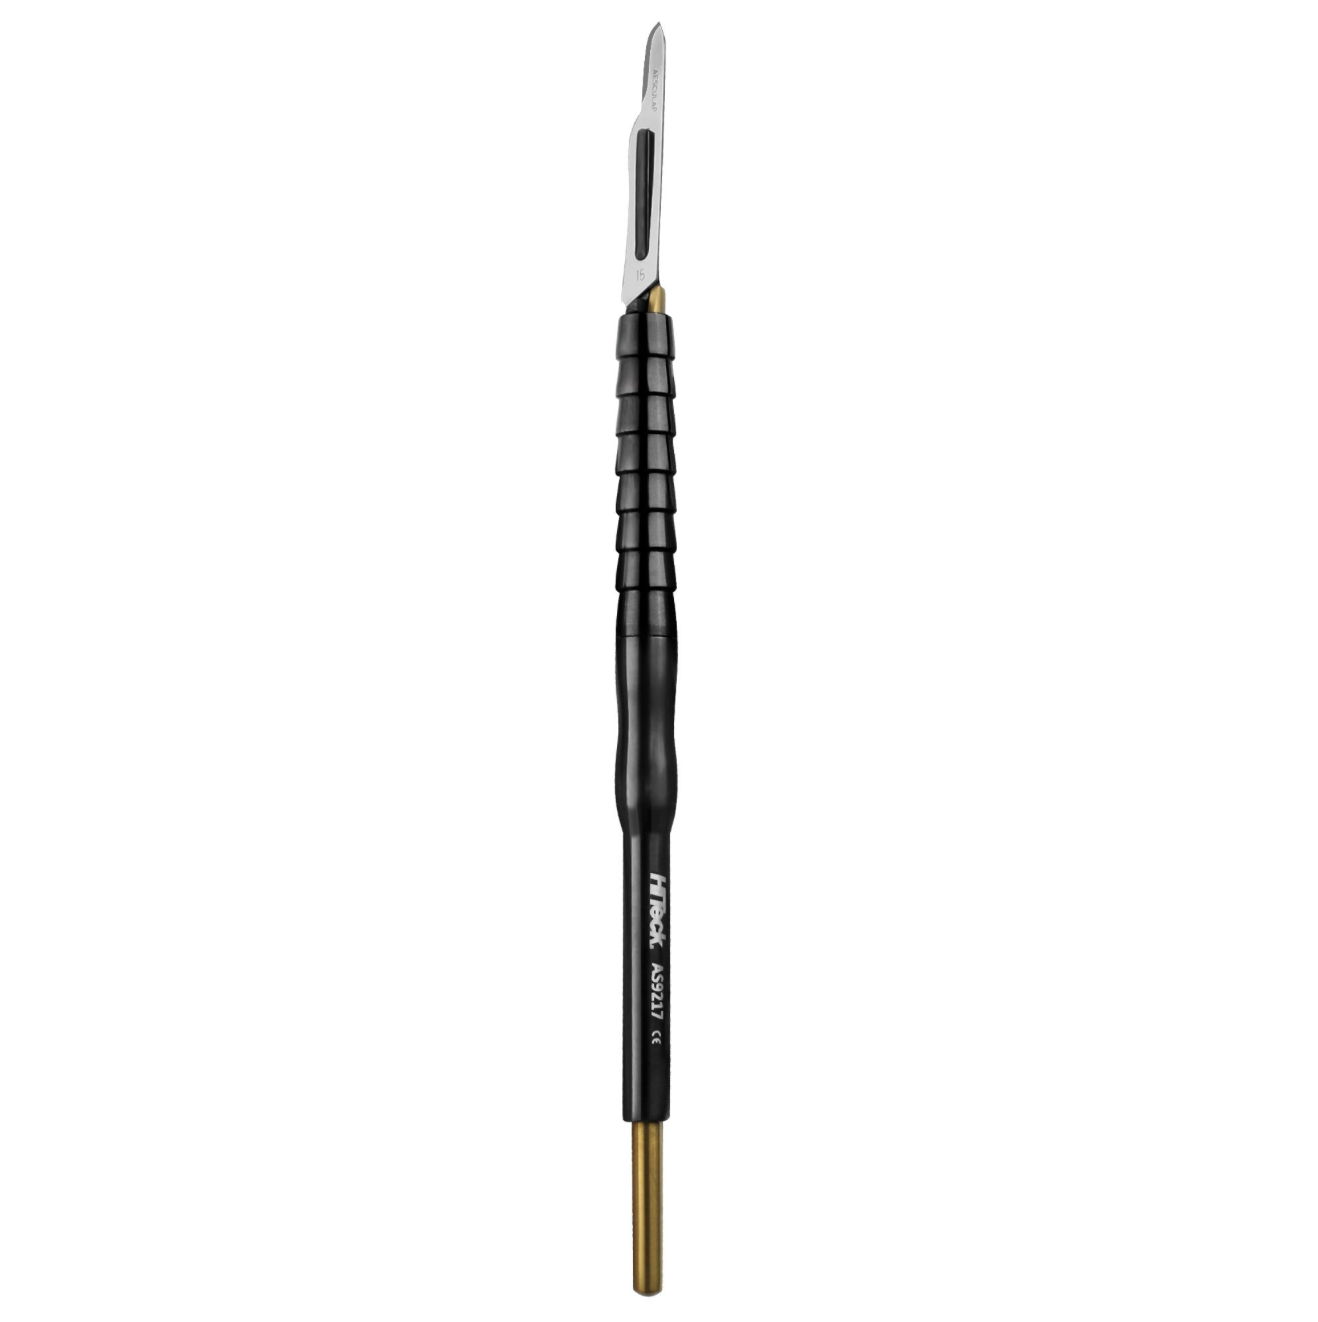 PUSH Scalpel Handle in black and gold, featuring automatic blade disposal for enhanced surgical safety.